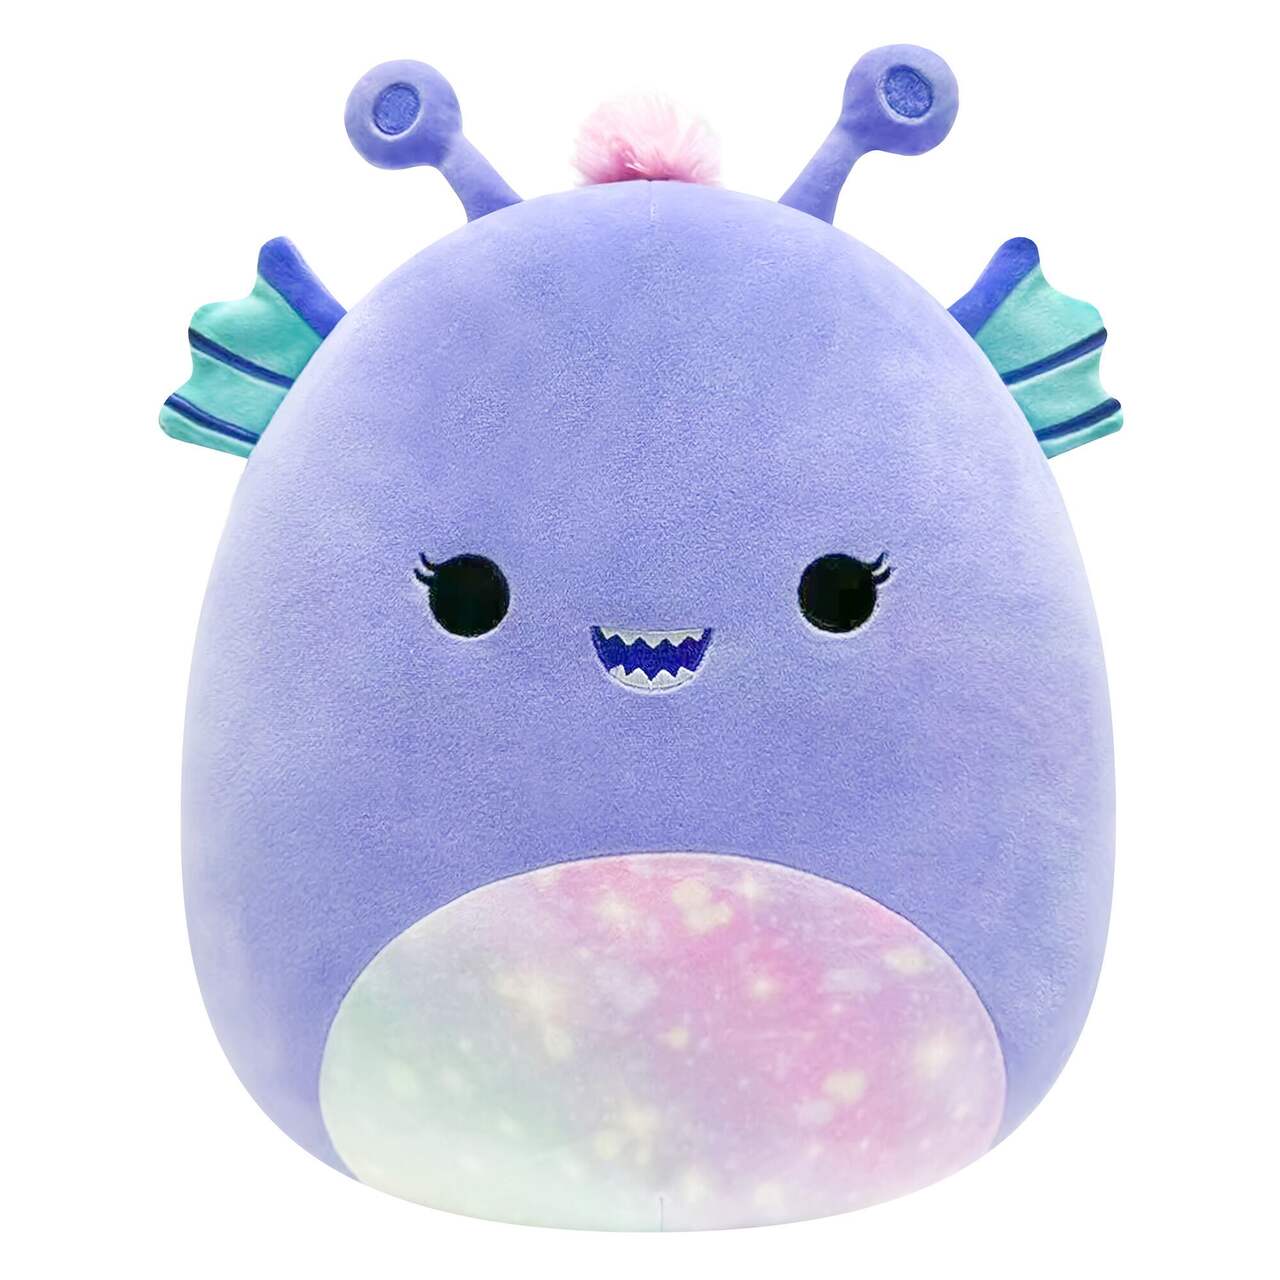 https://media-www.canadiantire.ca/product/seasonal-gardening/toys/preschool-toys-activities/0508300/squishmallow-12-plush-assorted-2a665ec2-3aba-4233-a504-e922c3a34692-jpgrendition.jpg?imdensity=1&imwidth=640&impolicy=mZoom